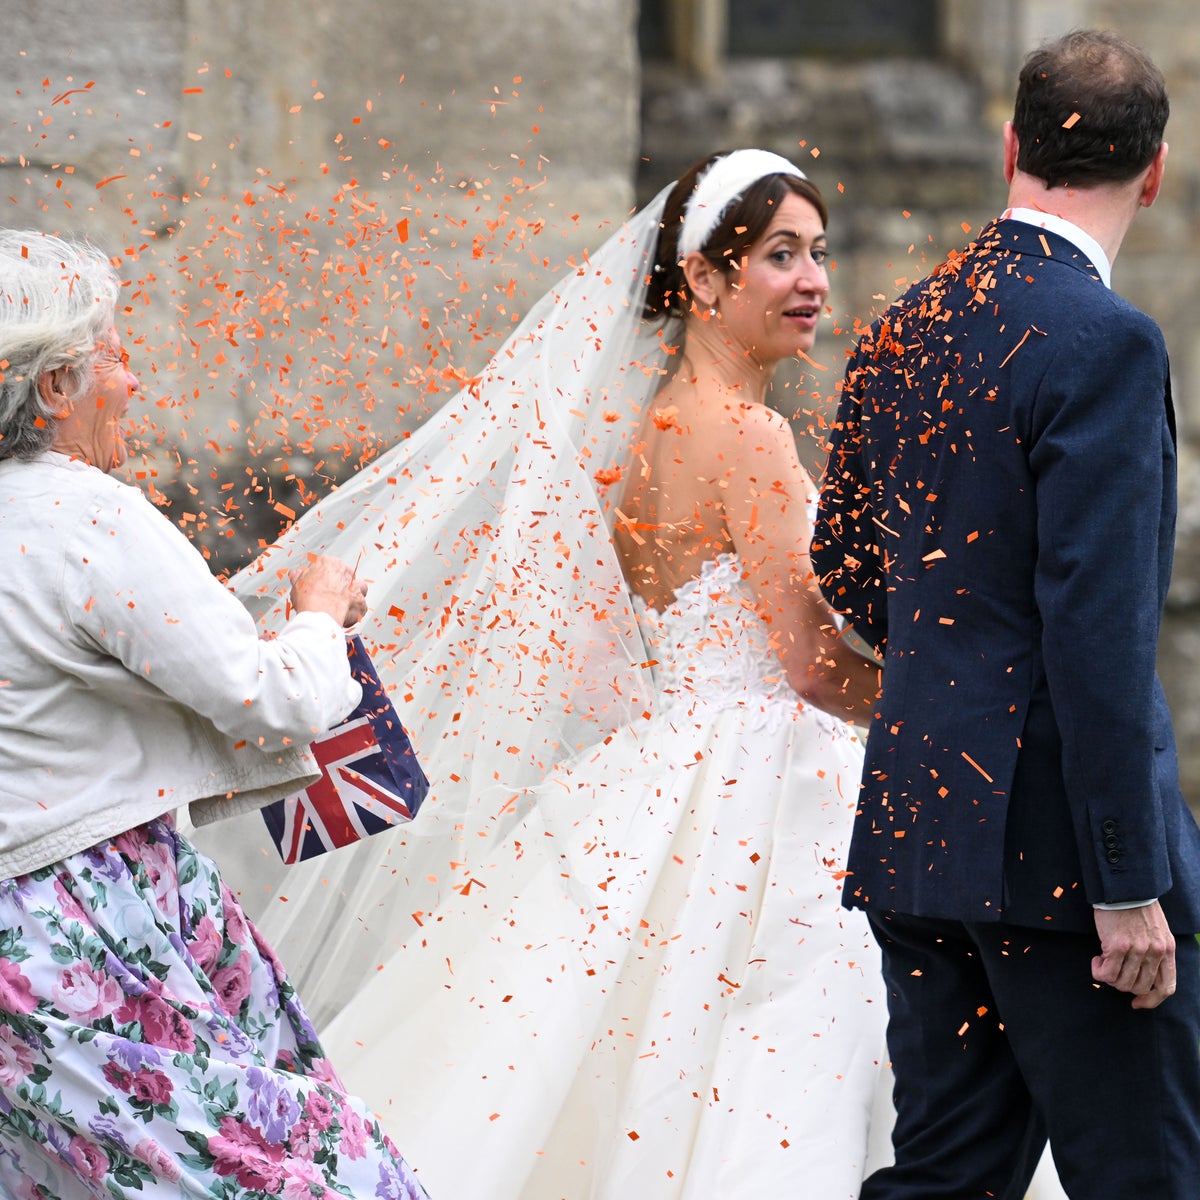 Confettigate: A Statement From Just Stop Oil The lady who threw confetti in Bruton yesterday was upholding a tradition that is common across many cultures. We absolutely defend the right for people to throw confetti (of whatever colour) at weddings and other celebrations. If it…